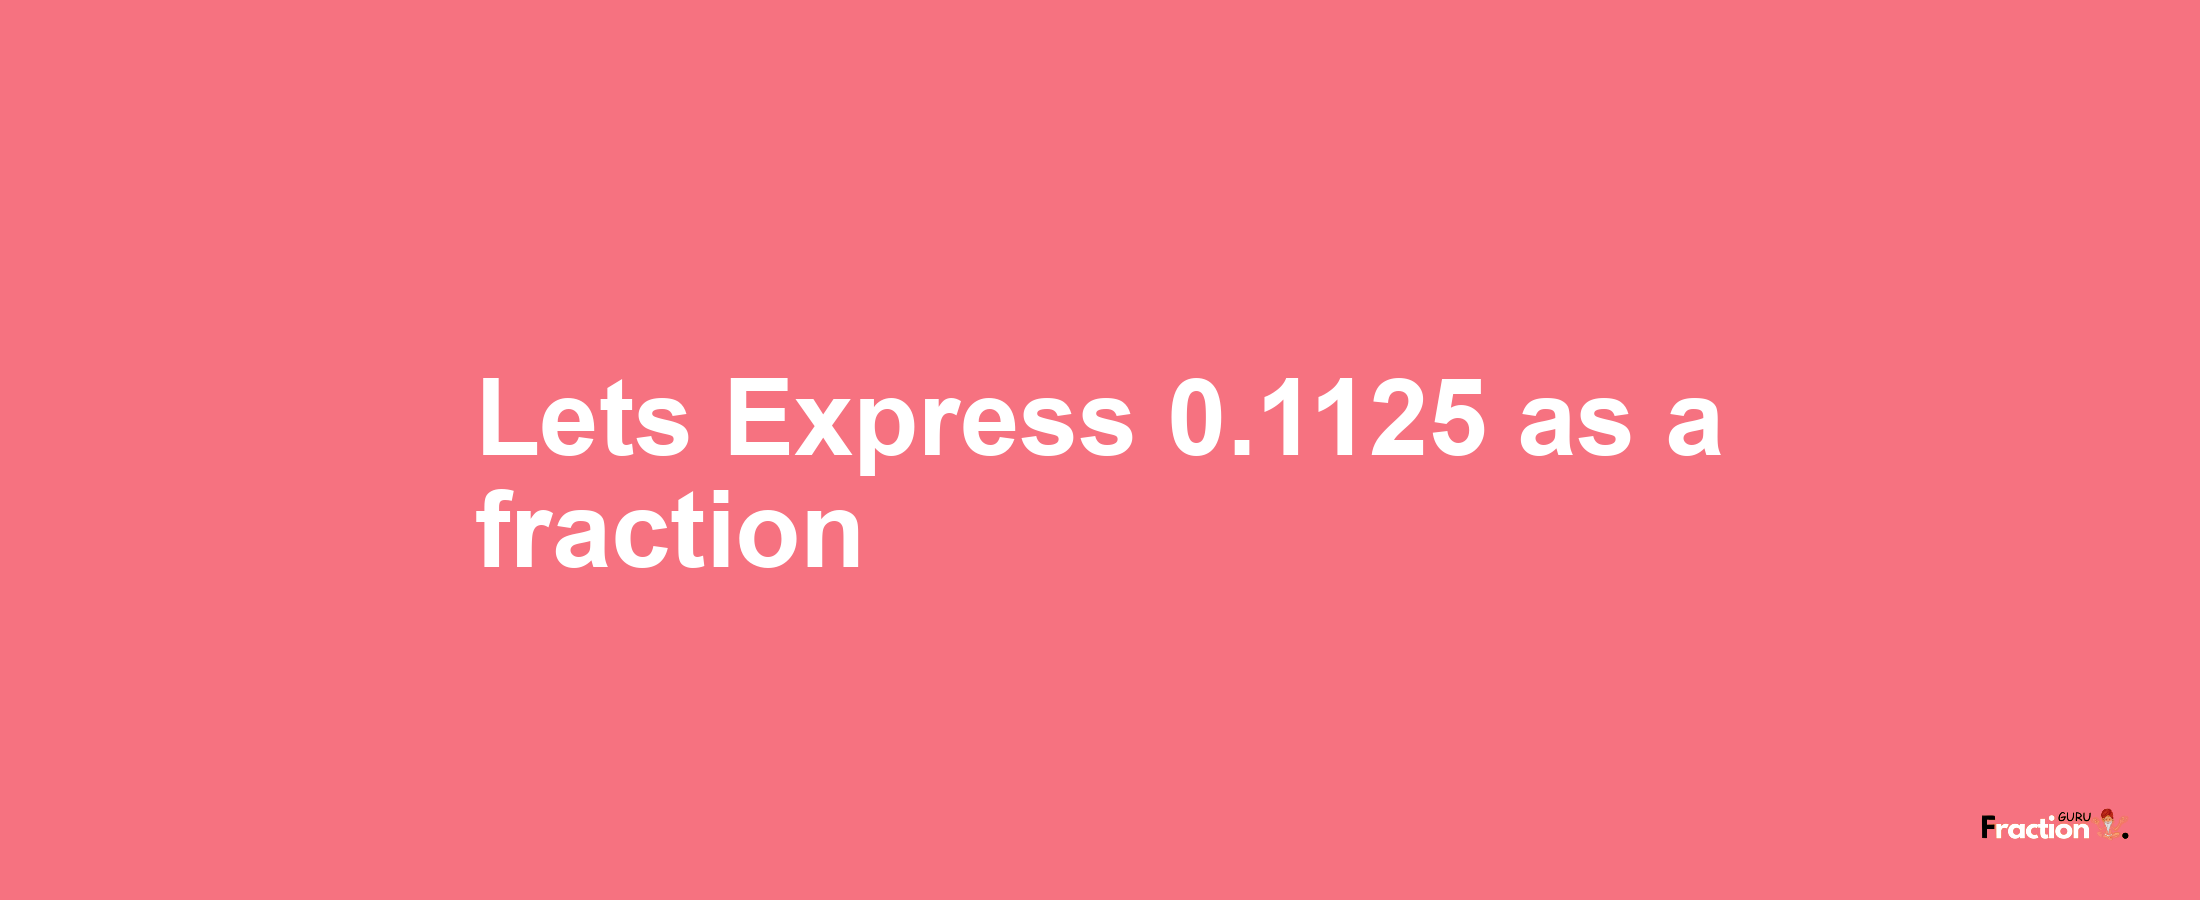 Lets Express 0.1125 as afraction